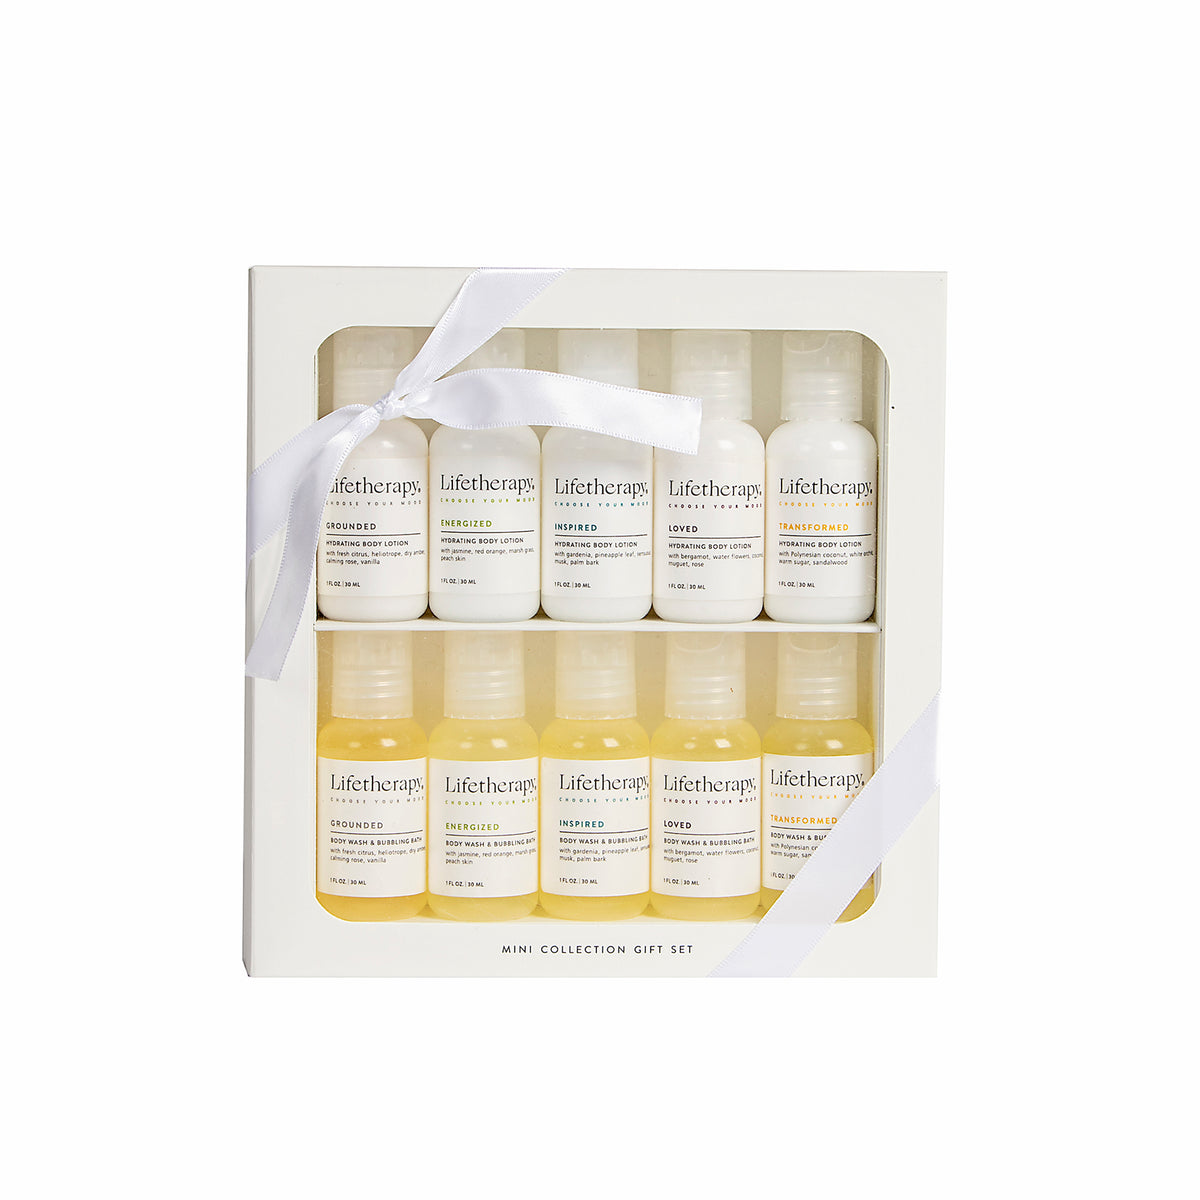 Mini Collection Gift Set – Lifetherapy